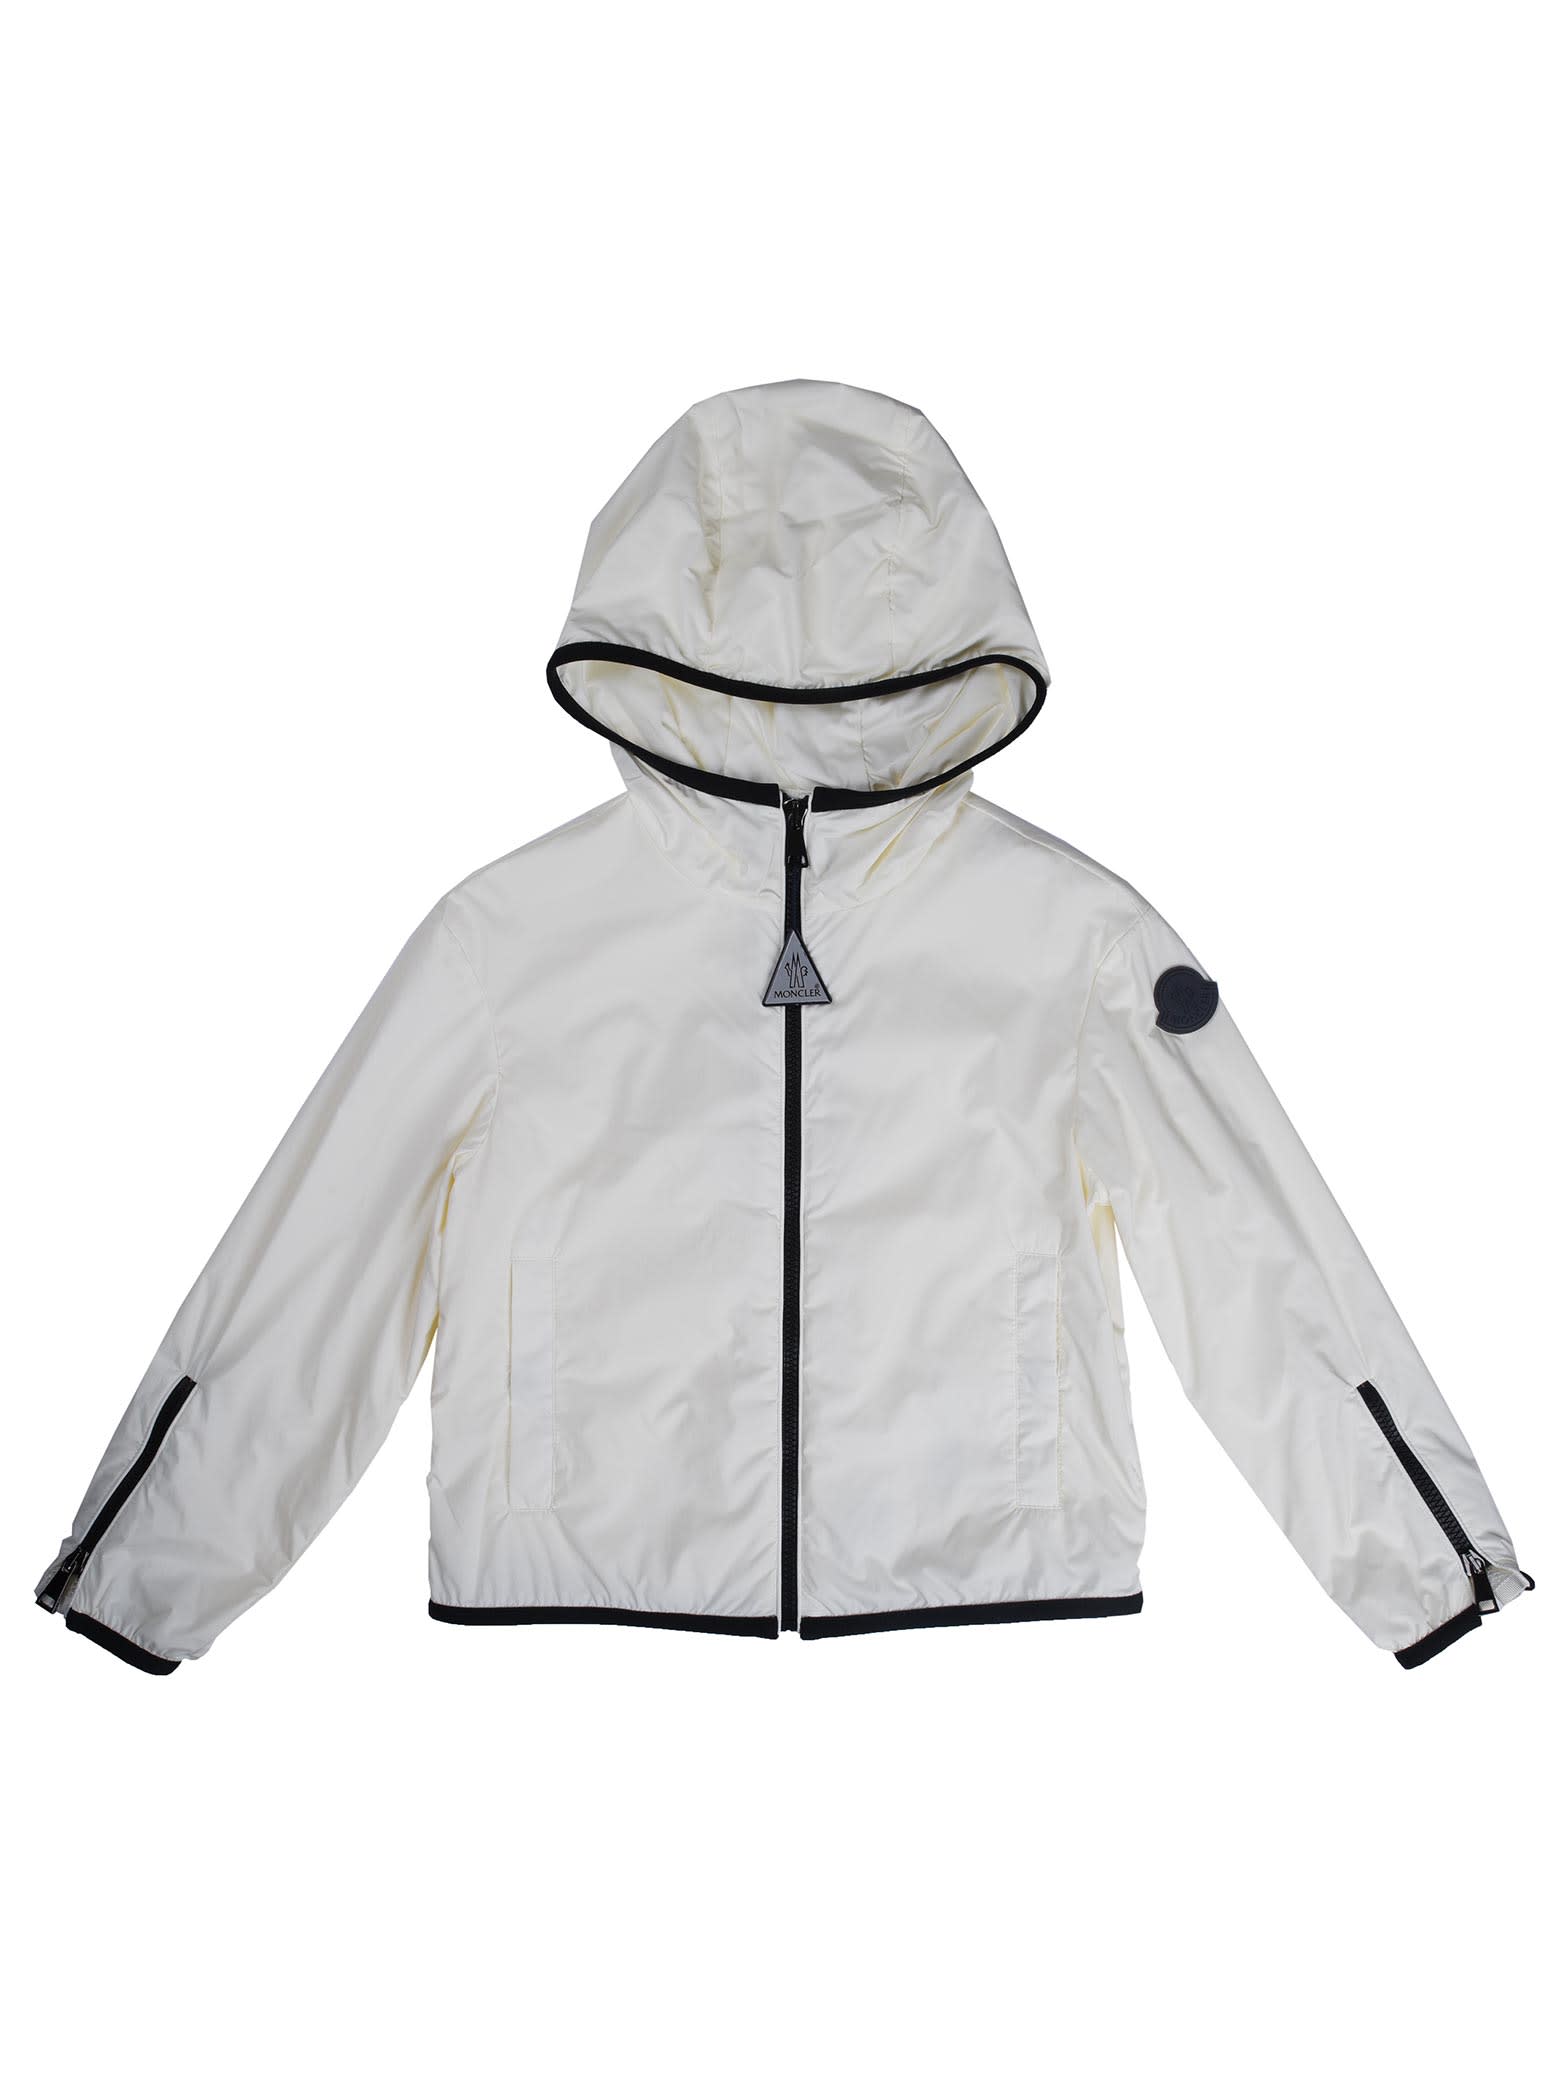 Moncler Breanna Ivory Jacket With Hood